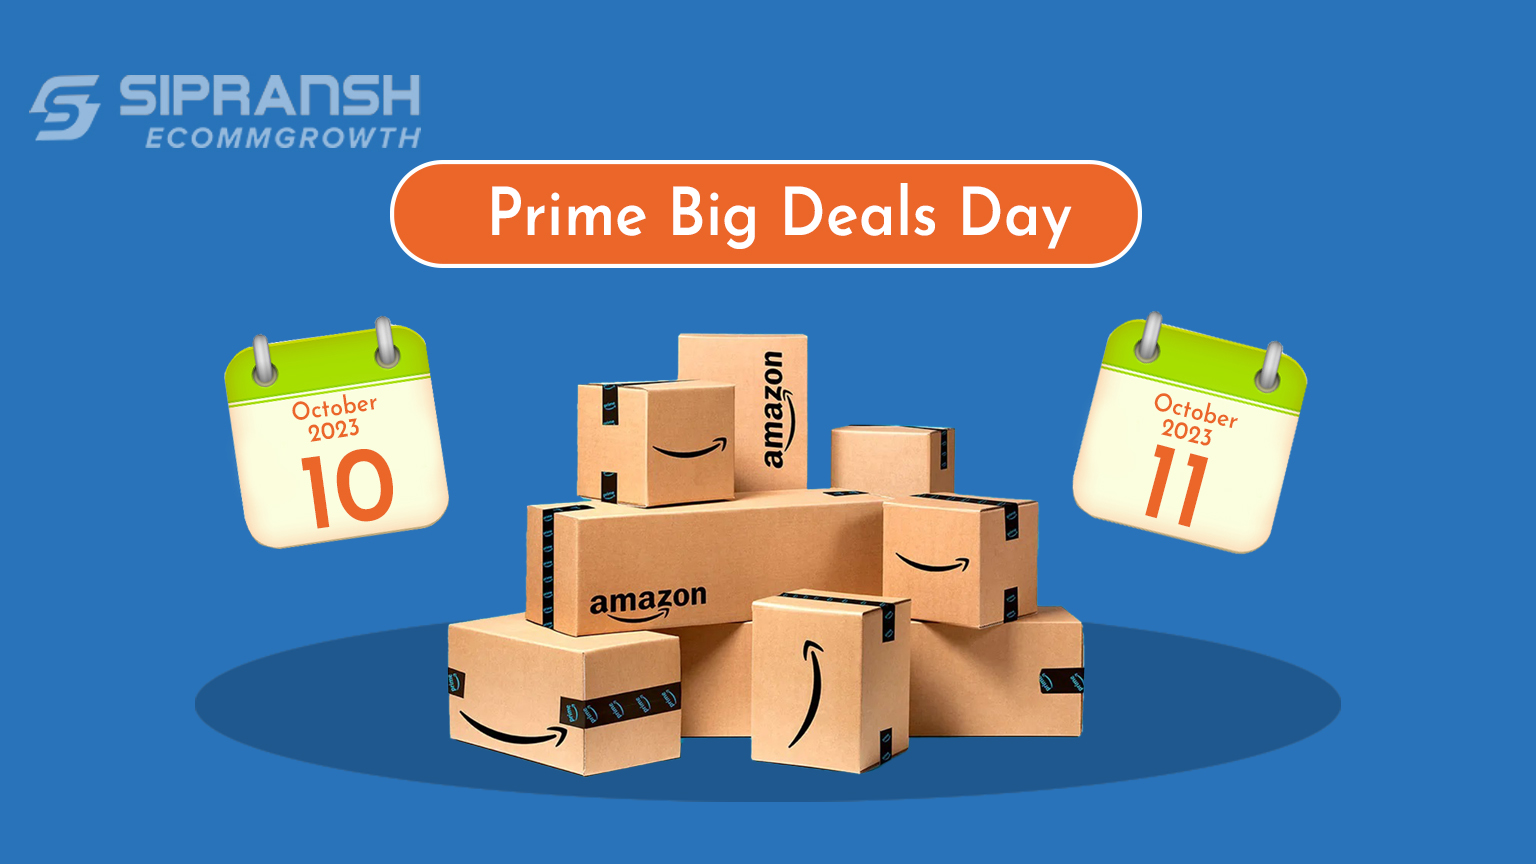 Prime Big Deal Days are on 10th and 11th October.